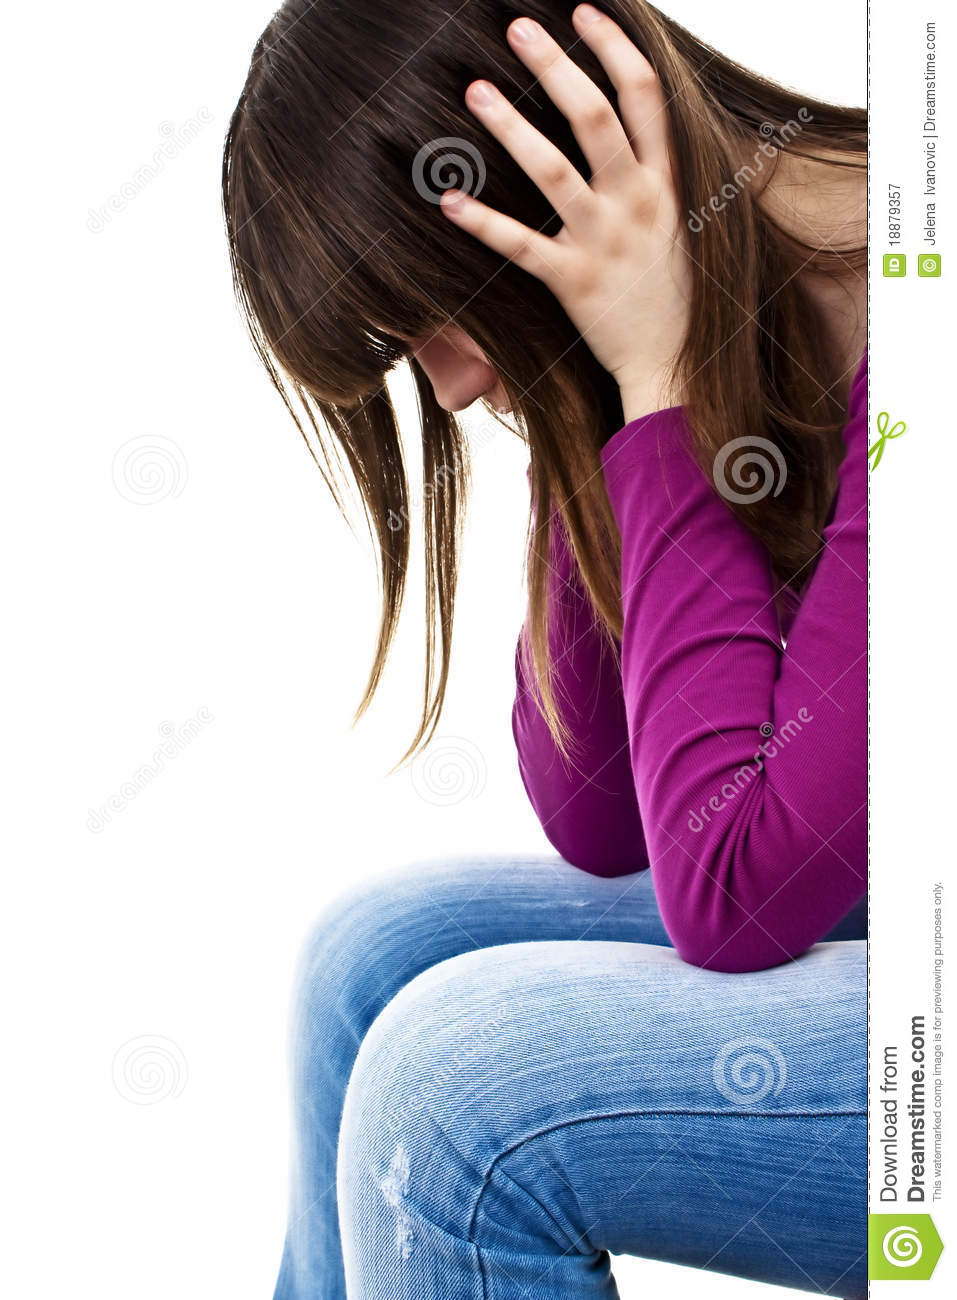 Teenage Girl Depression   Lost Love Royalty Free Stock Photography    